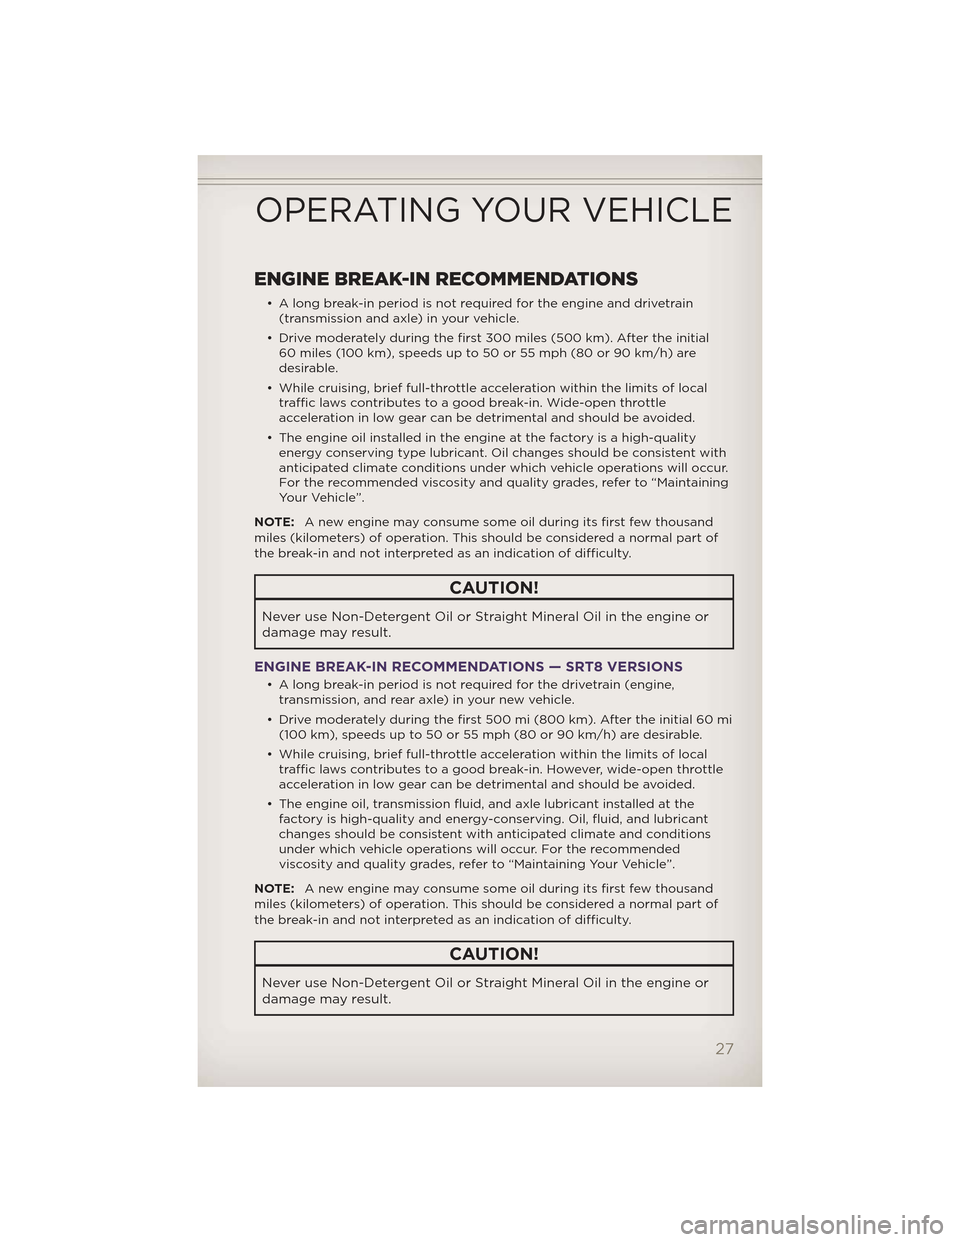 JEEP GRAND CHEROKEE 2012 WK2 / 4.G Owners Manual ENGINE BREAK-IN RECOMMENDATIONS
• A long break-in period is not required for the engine and drivetrain(transmission and axle) in your vehicle.
• Drive moderately during the first 300 miles (500 km